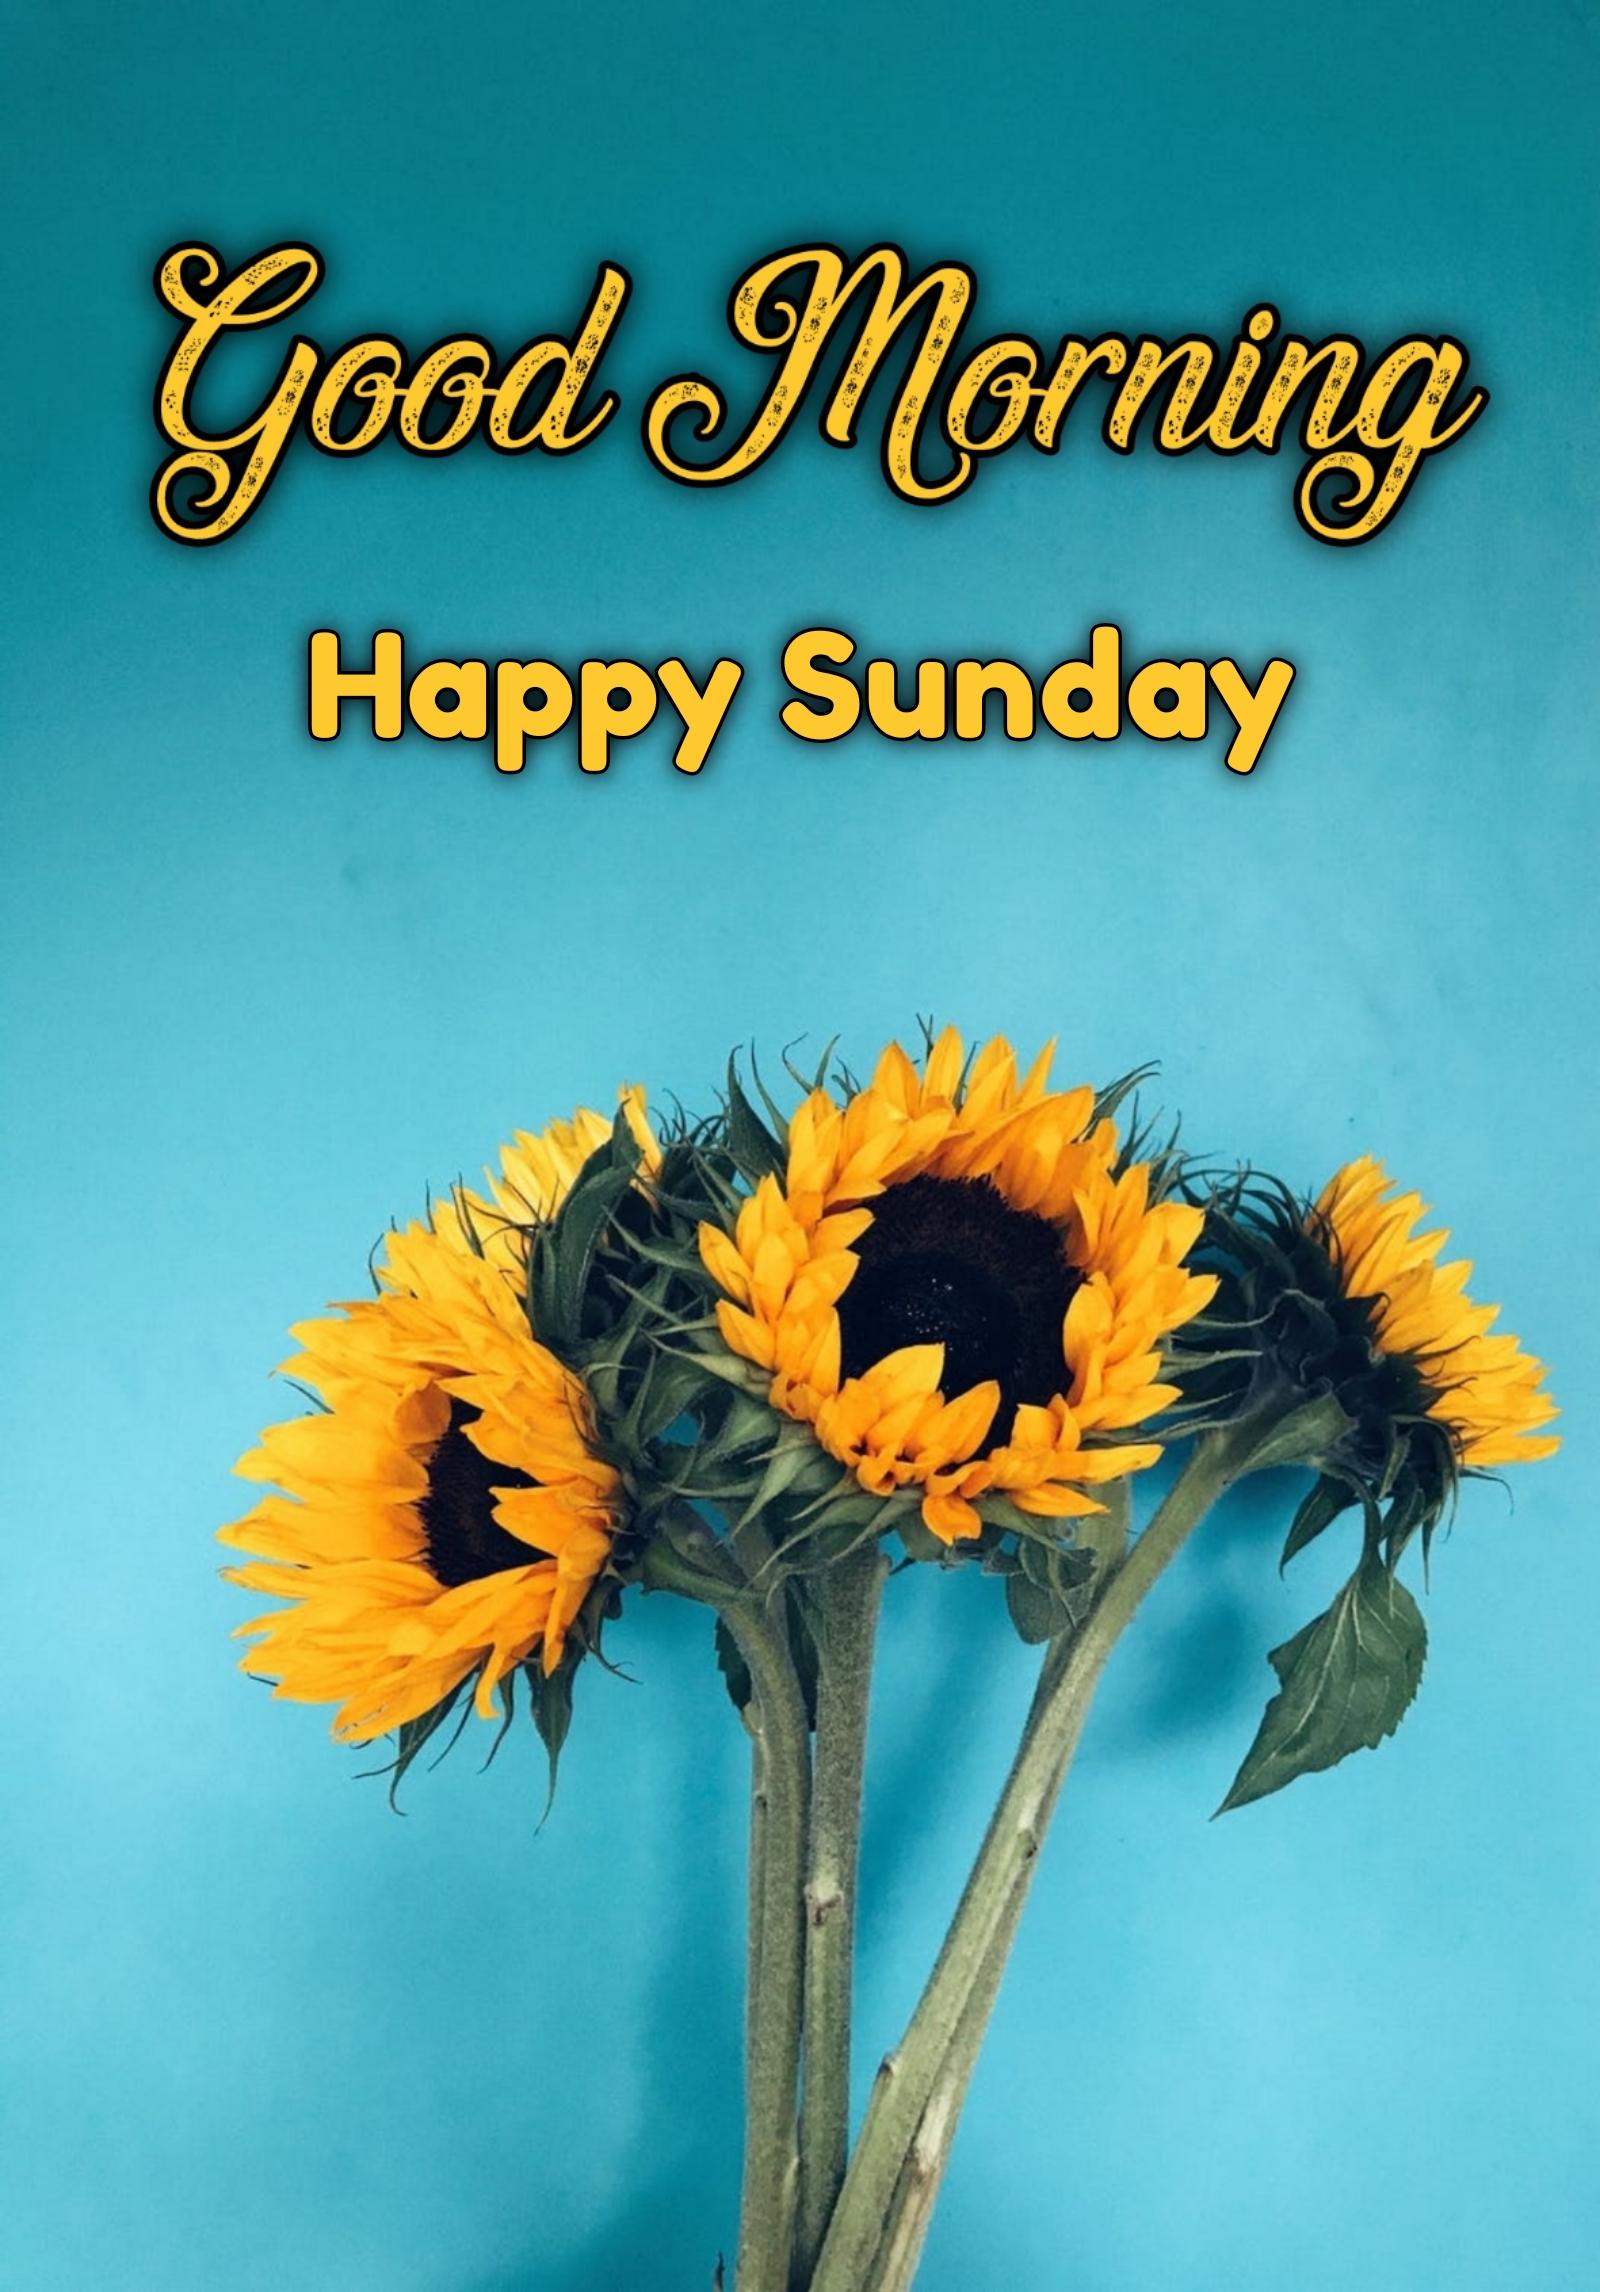 ᐅTop143+ Good Morning Happy Sunday Images & GIFs